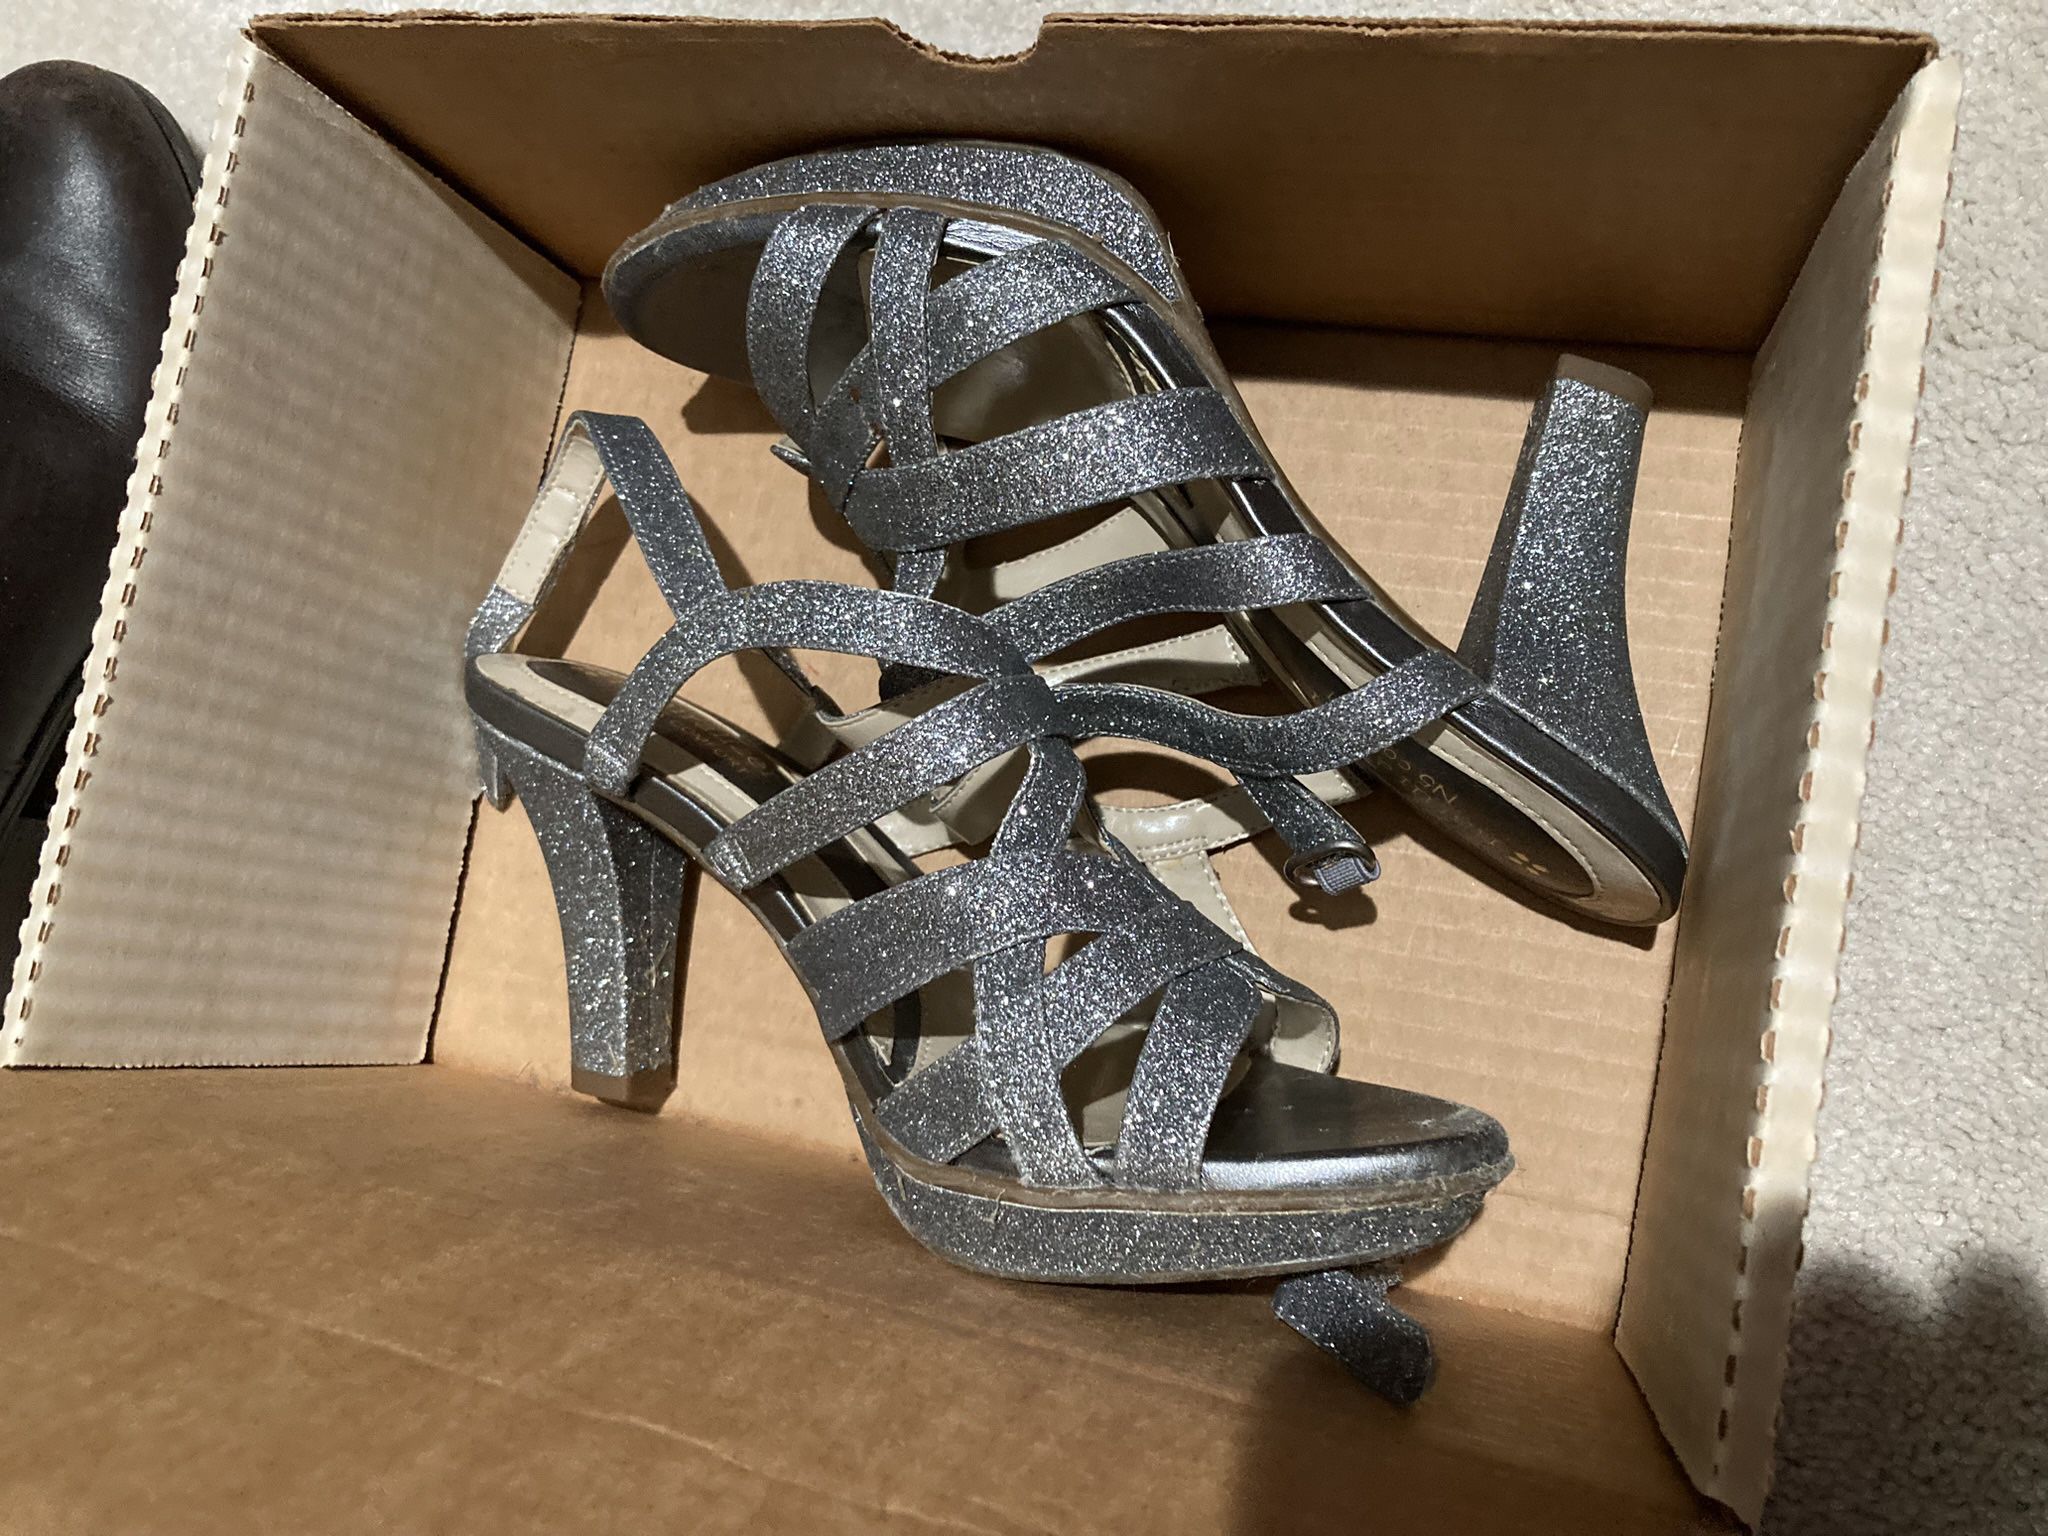 Formal gorgeous, hardly worn silver sparkly sandal heels size 7